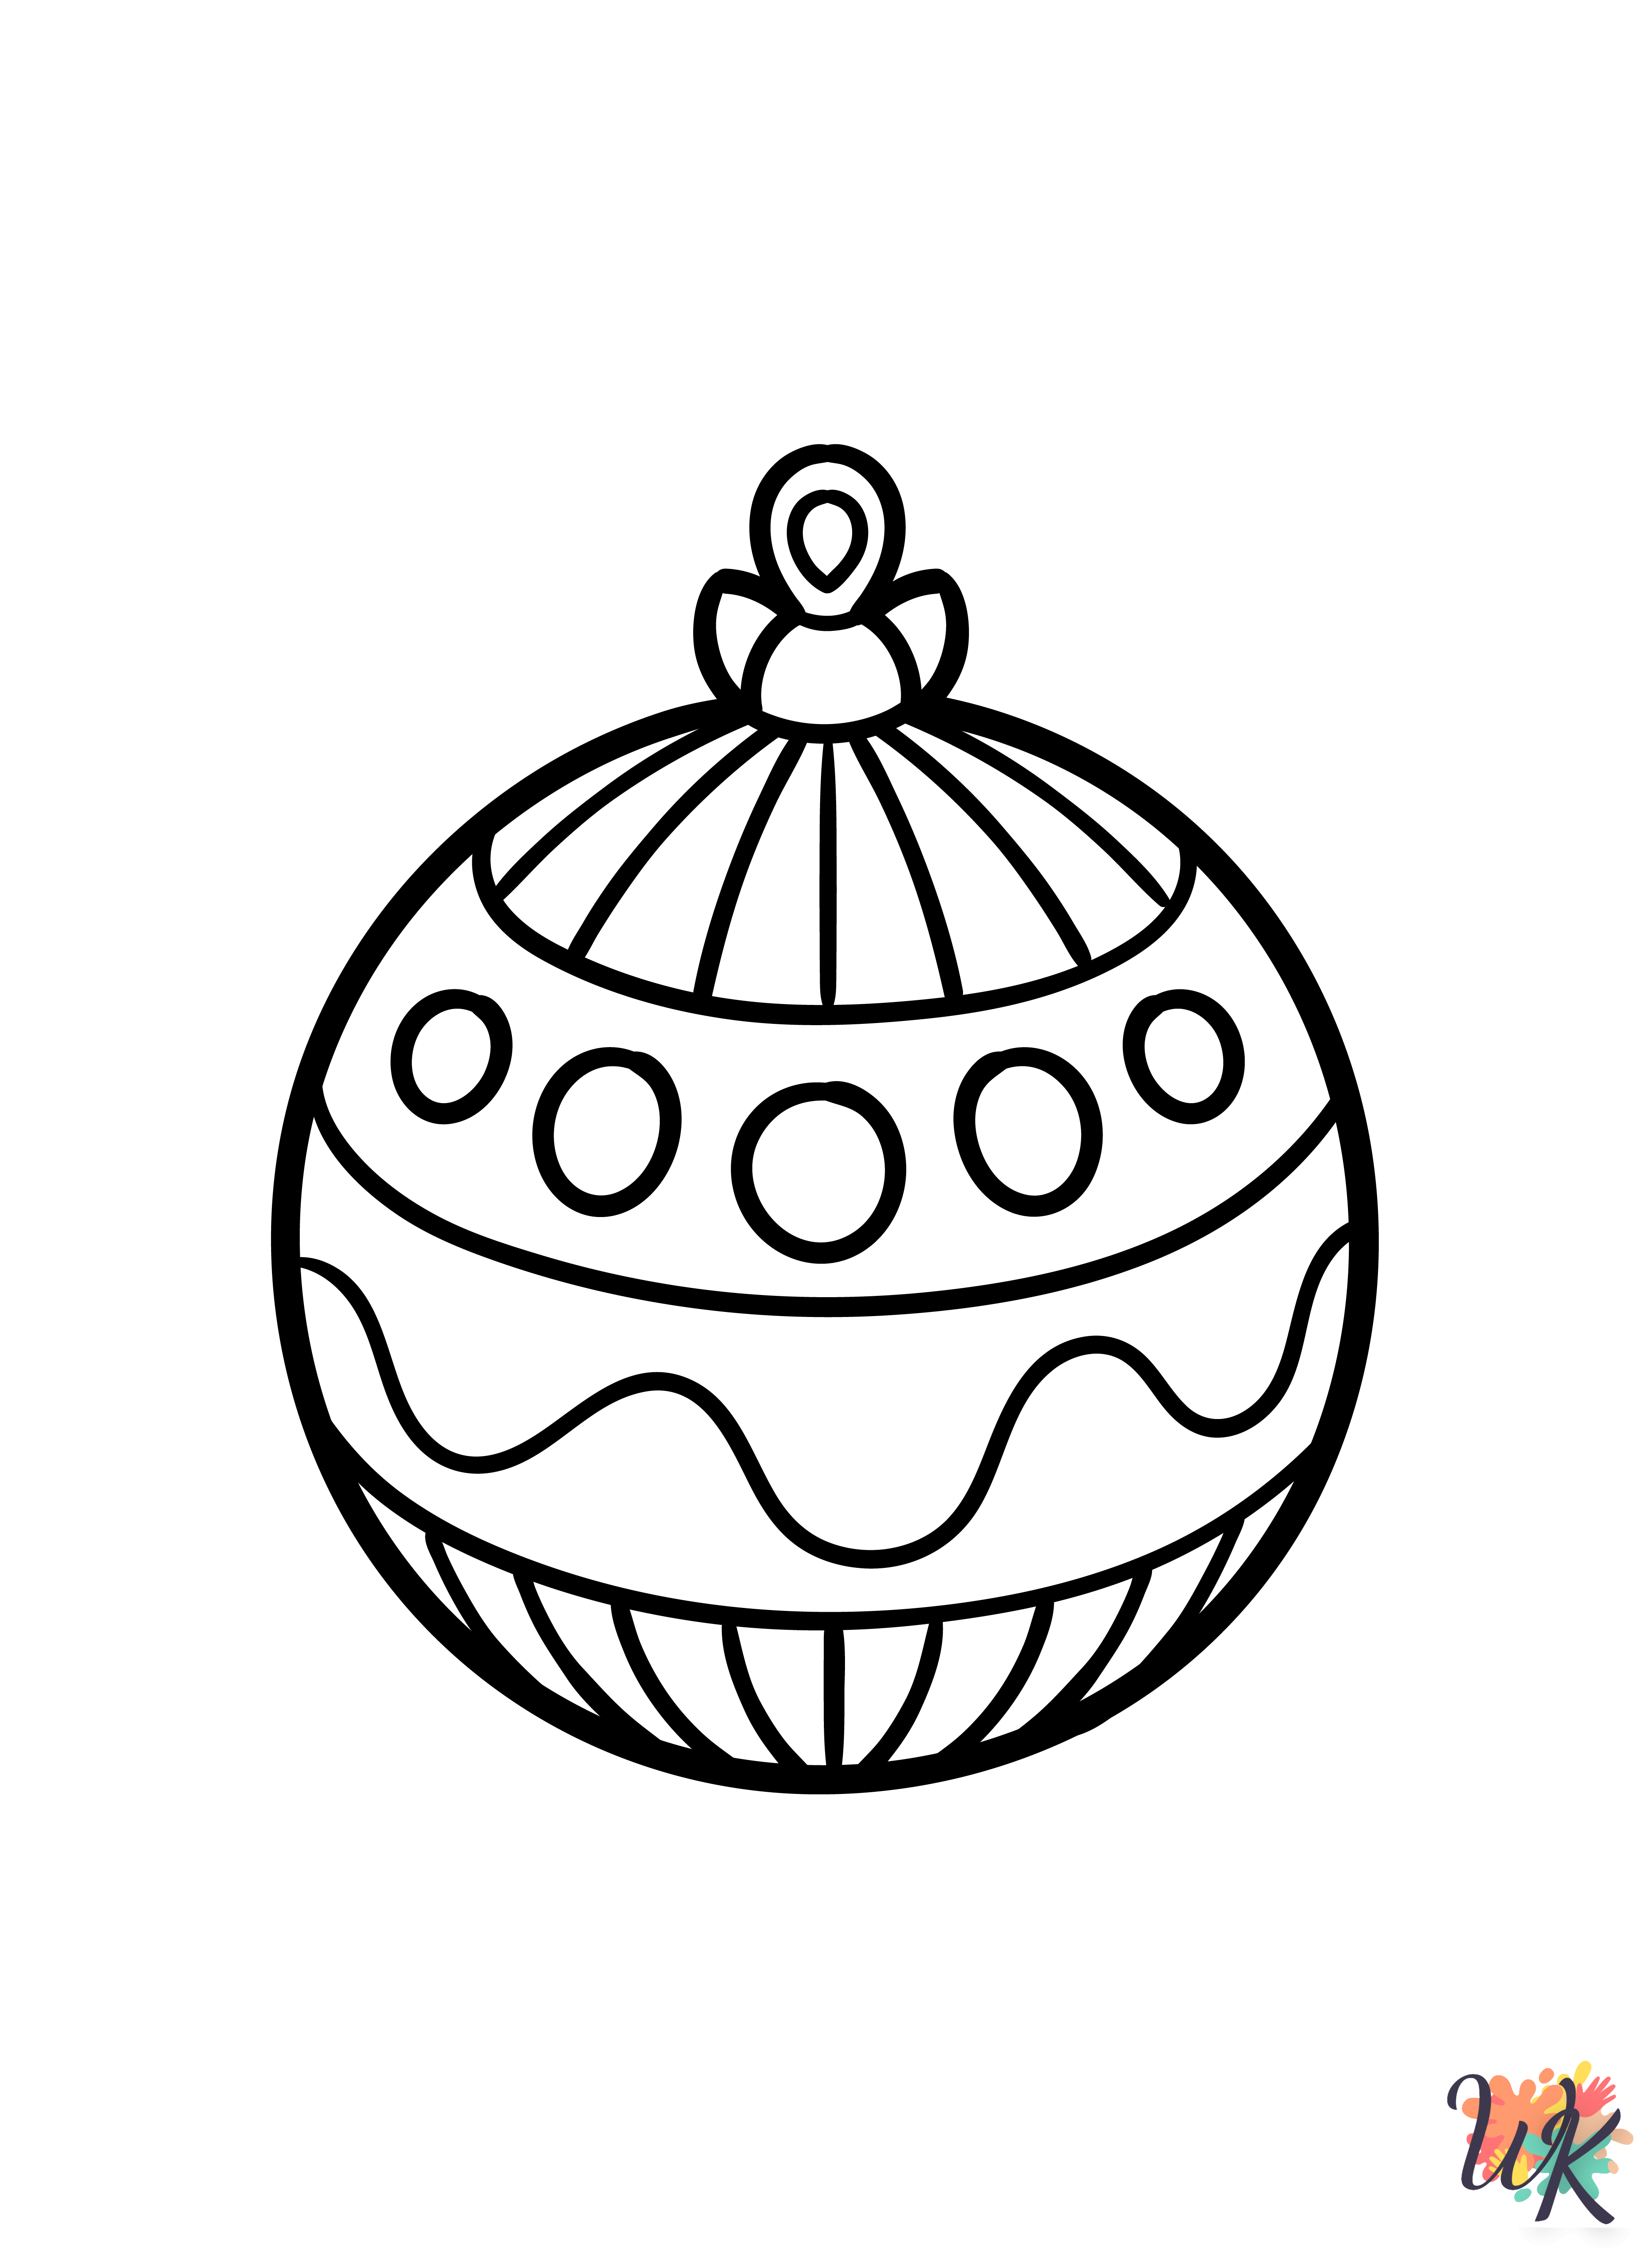 Christmas Ornament free coloring pages